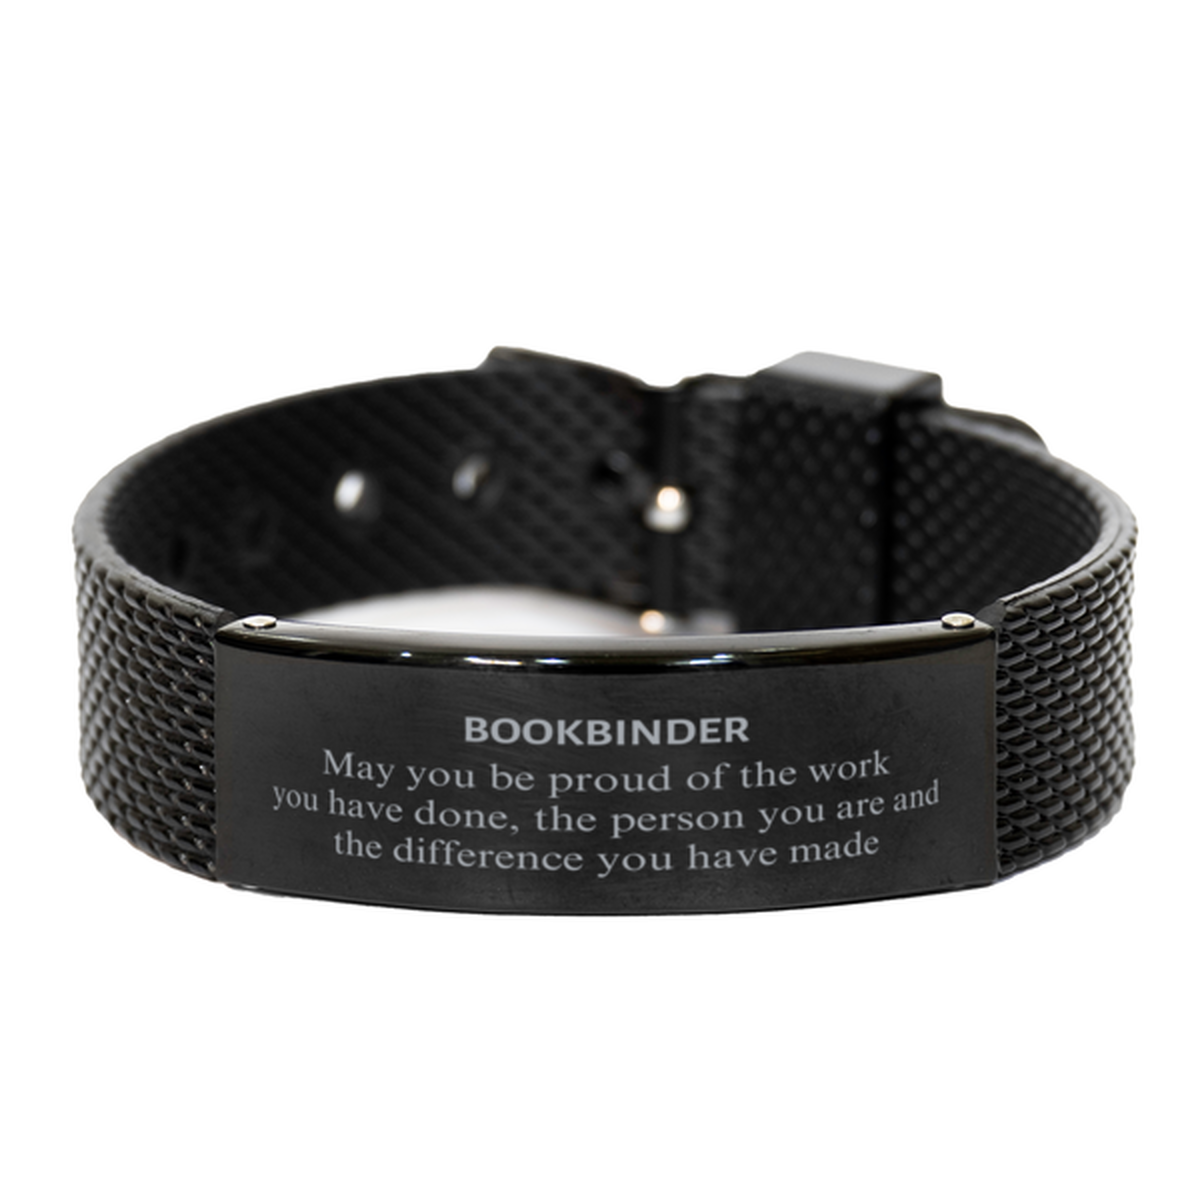 Bookbinder May you be proud of the work you have done, Retirement Bookbinder Black Shark Mesh Bracelet for Colleague Appreciation Gifts Amazing for Bookbinder